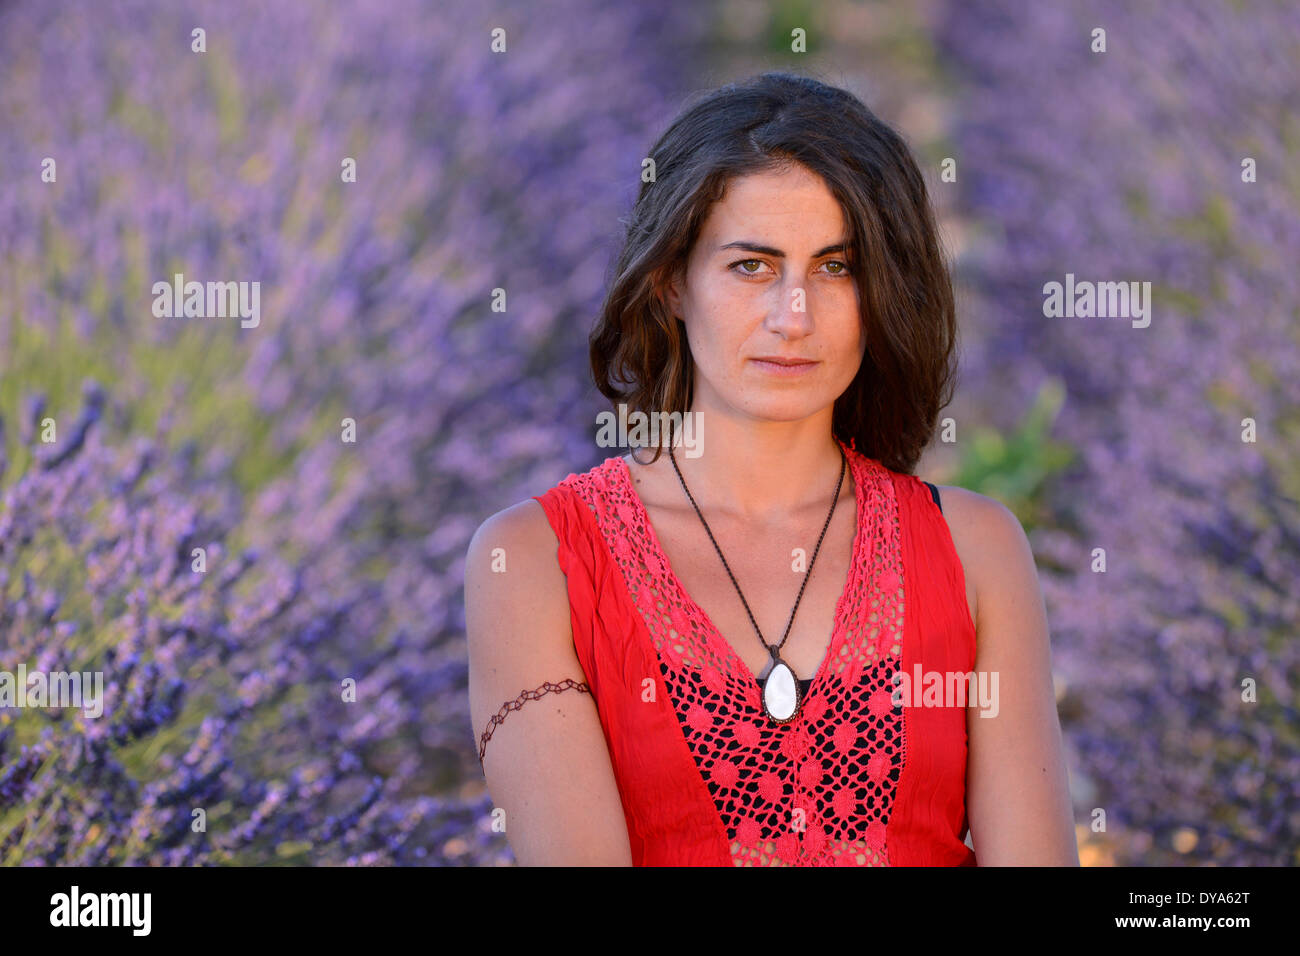 Europe France Provence Vaucluse lavender field woman red dress bloom blooming nature girl french brunette flowers flowering Stock Photo